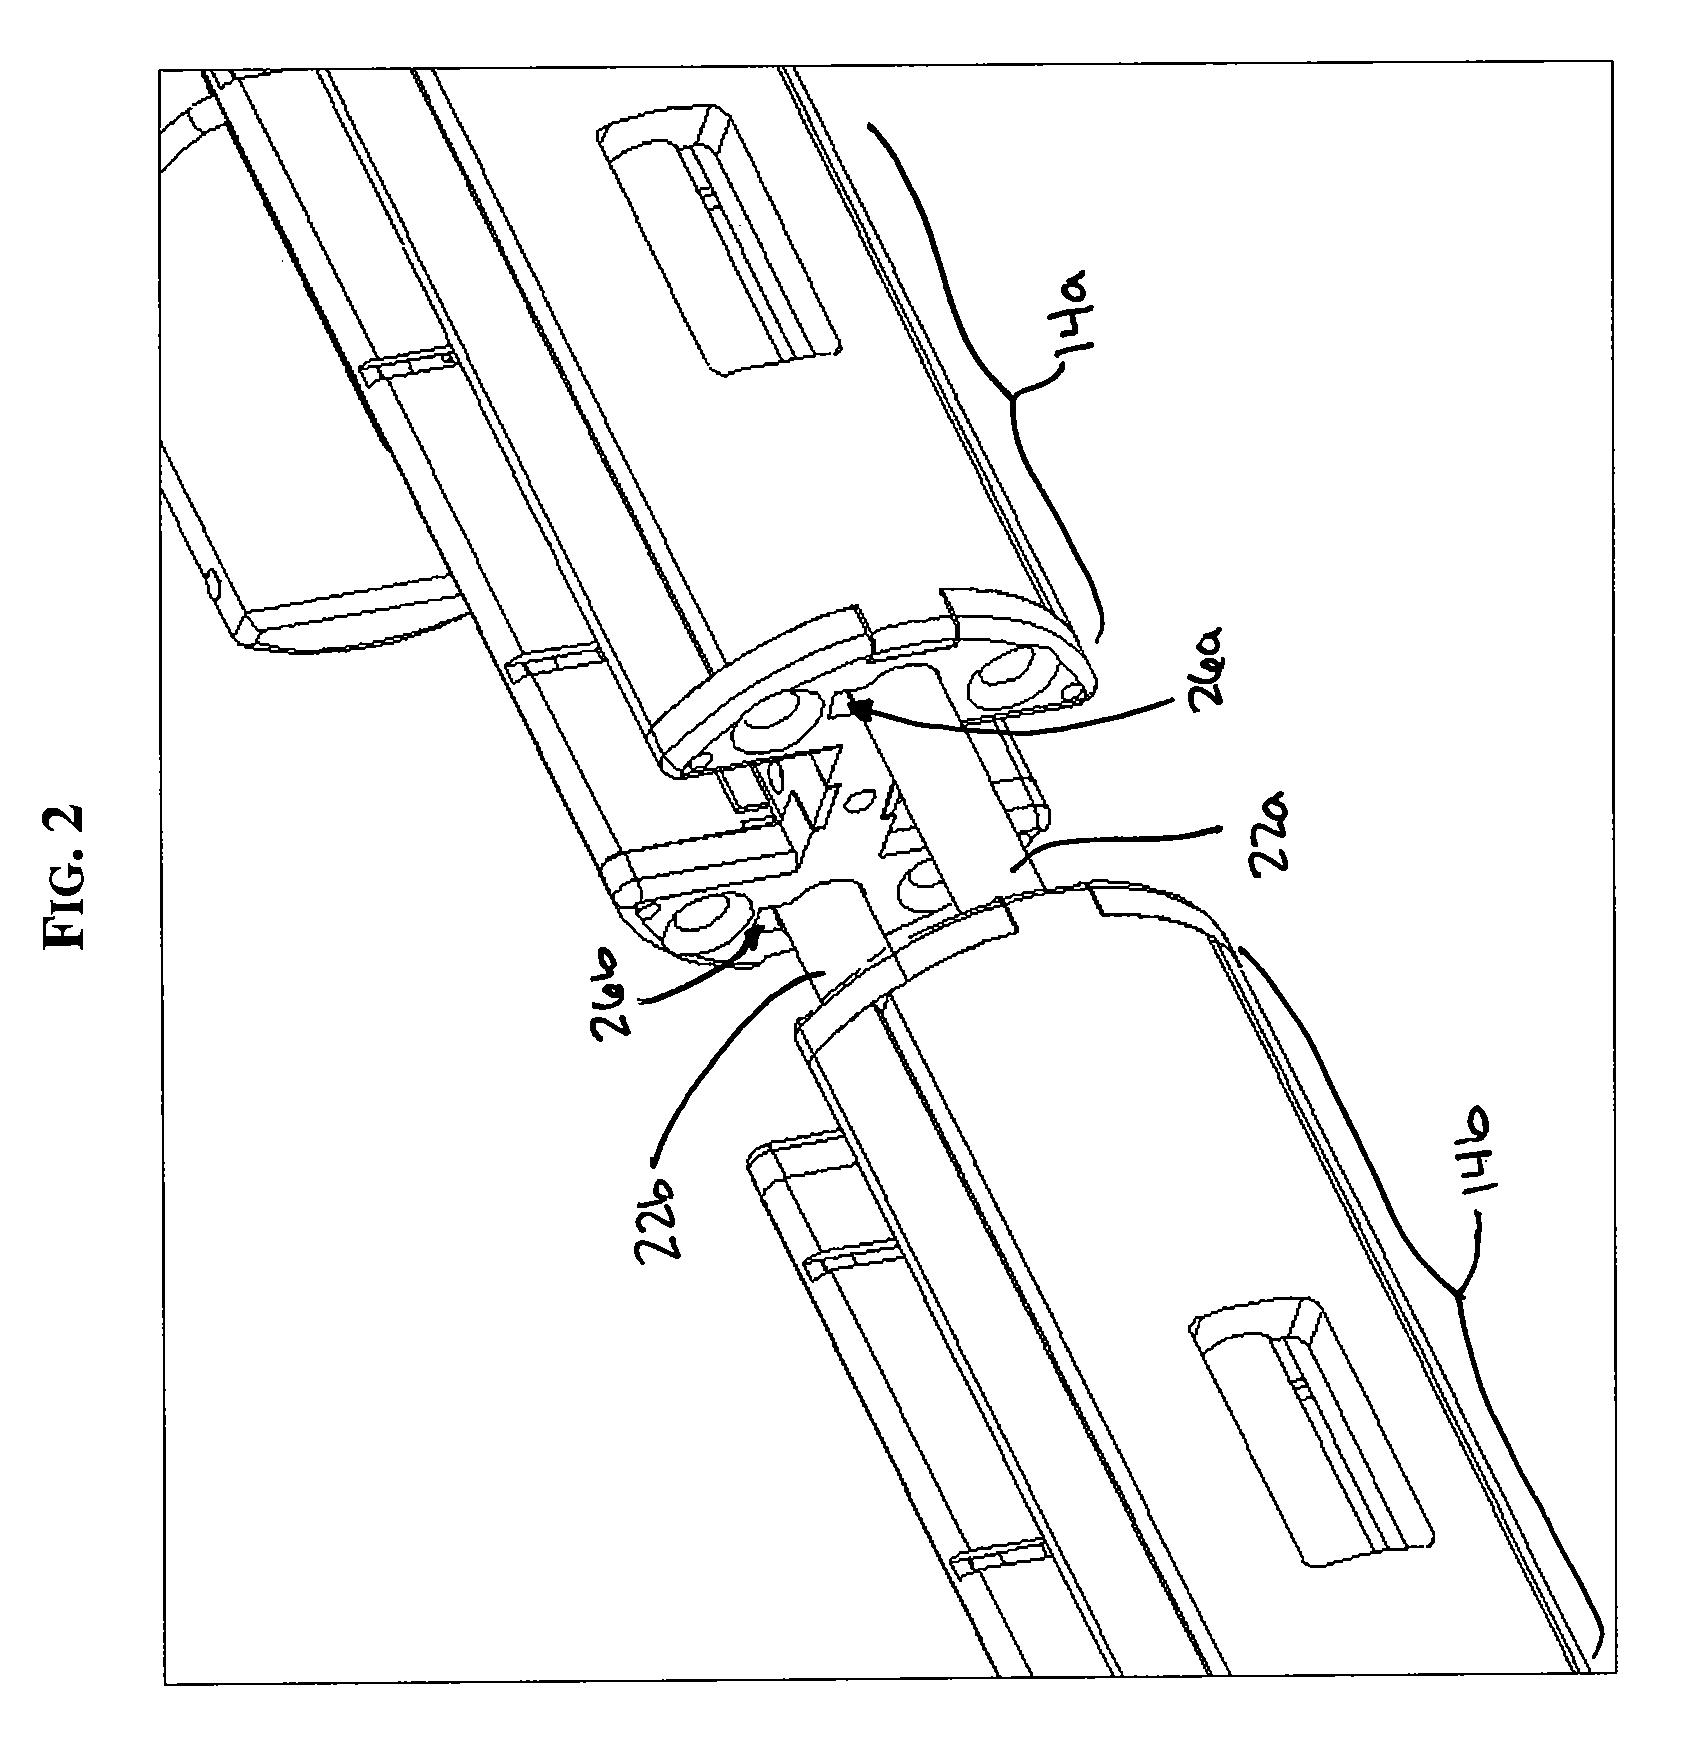 Endoscopic gastric restriction methods and devices